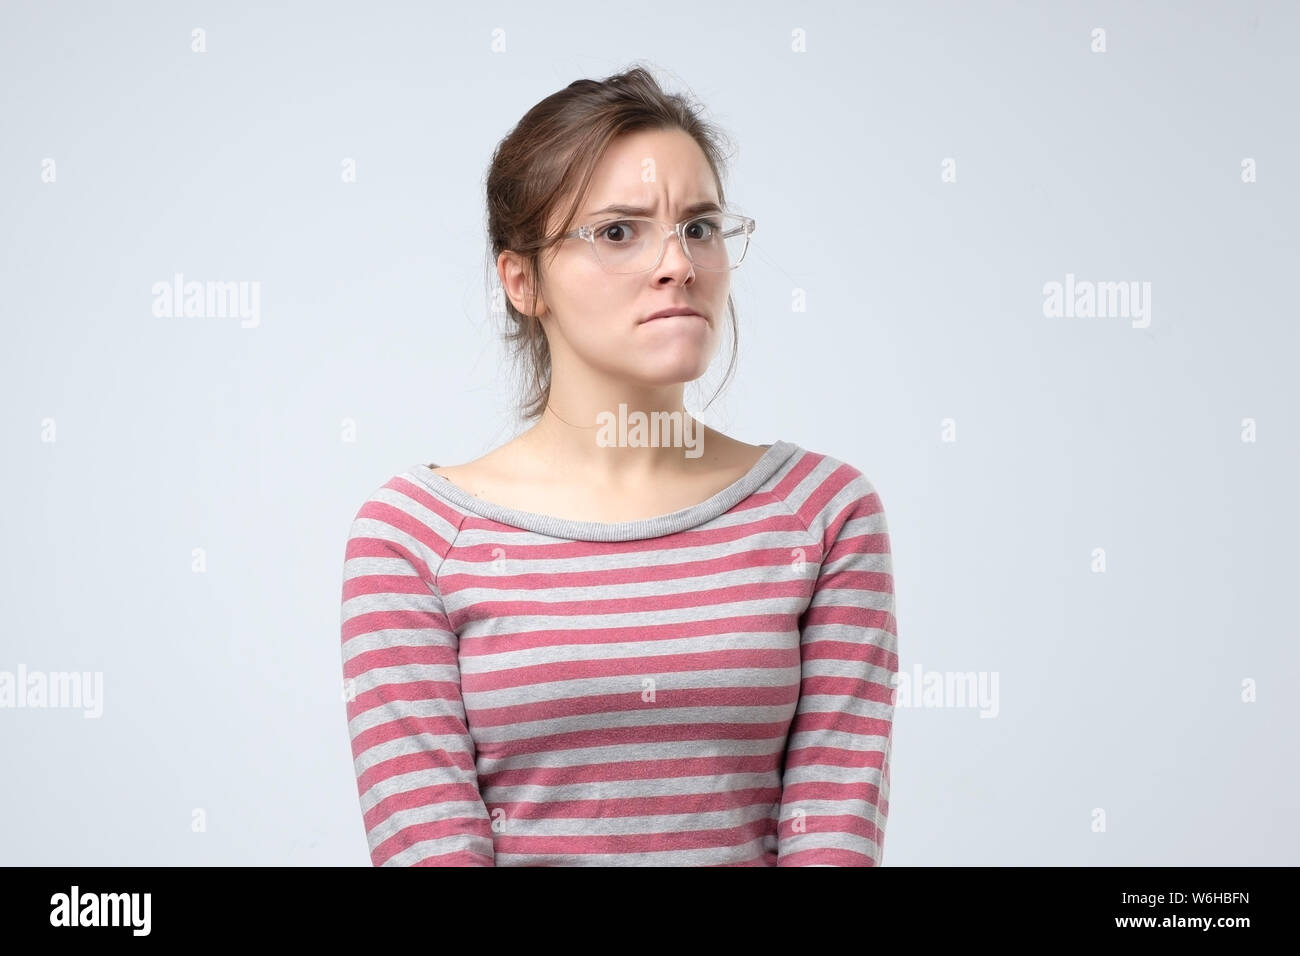 Woman in glasses looks aside with pensive expression, Stock Photo